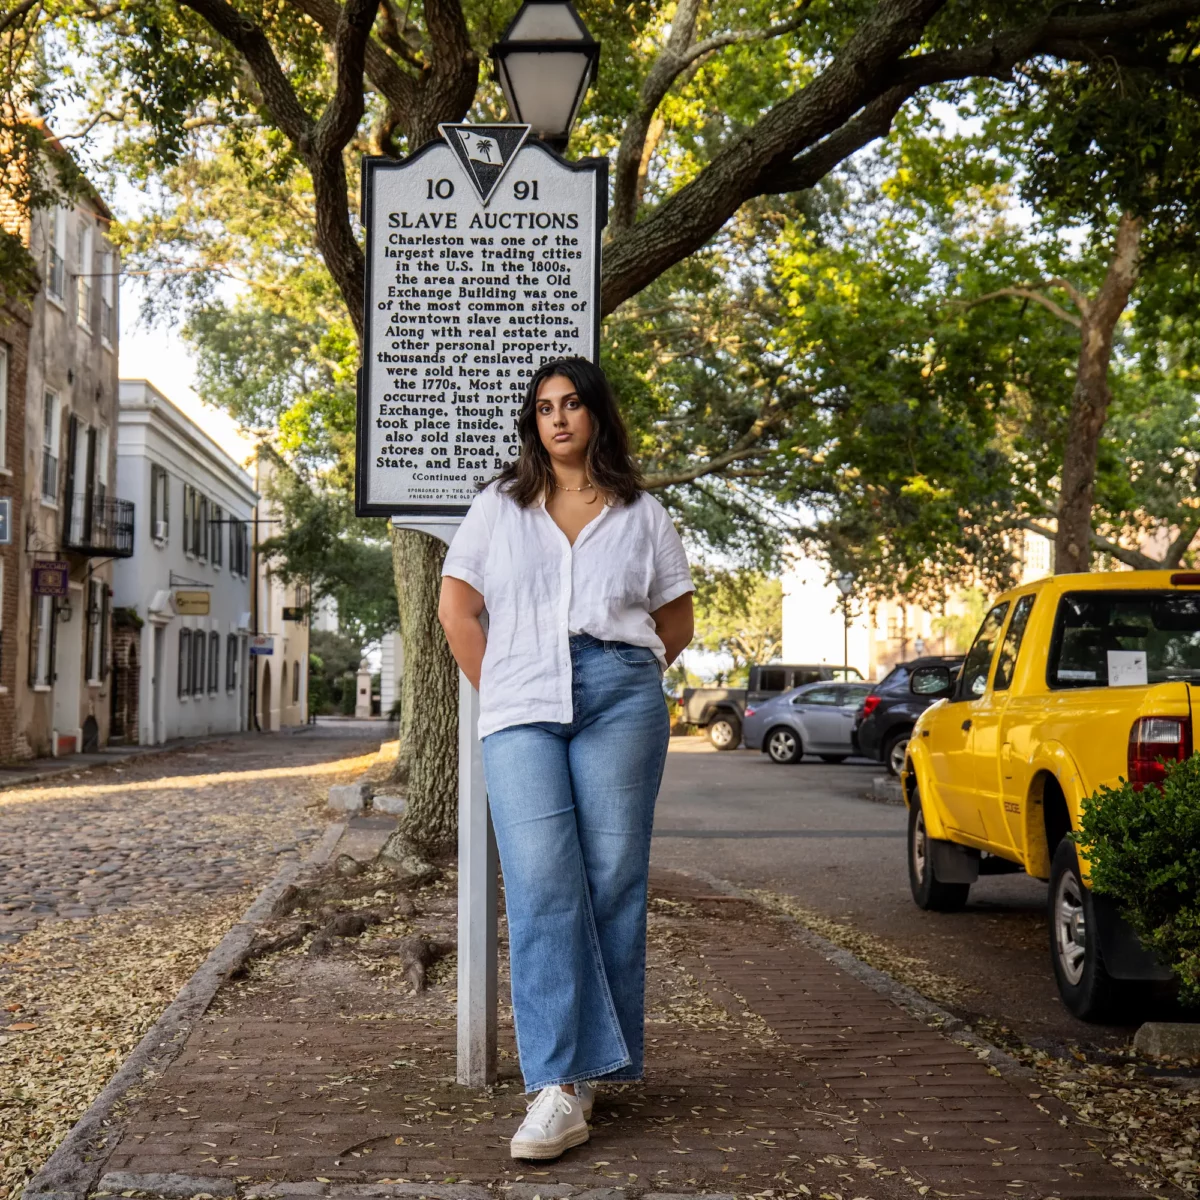 A woman with brown skin stands on a street in Charleston in front of a sign with information about slave auctions